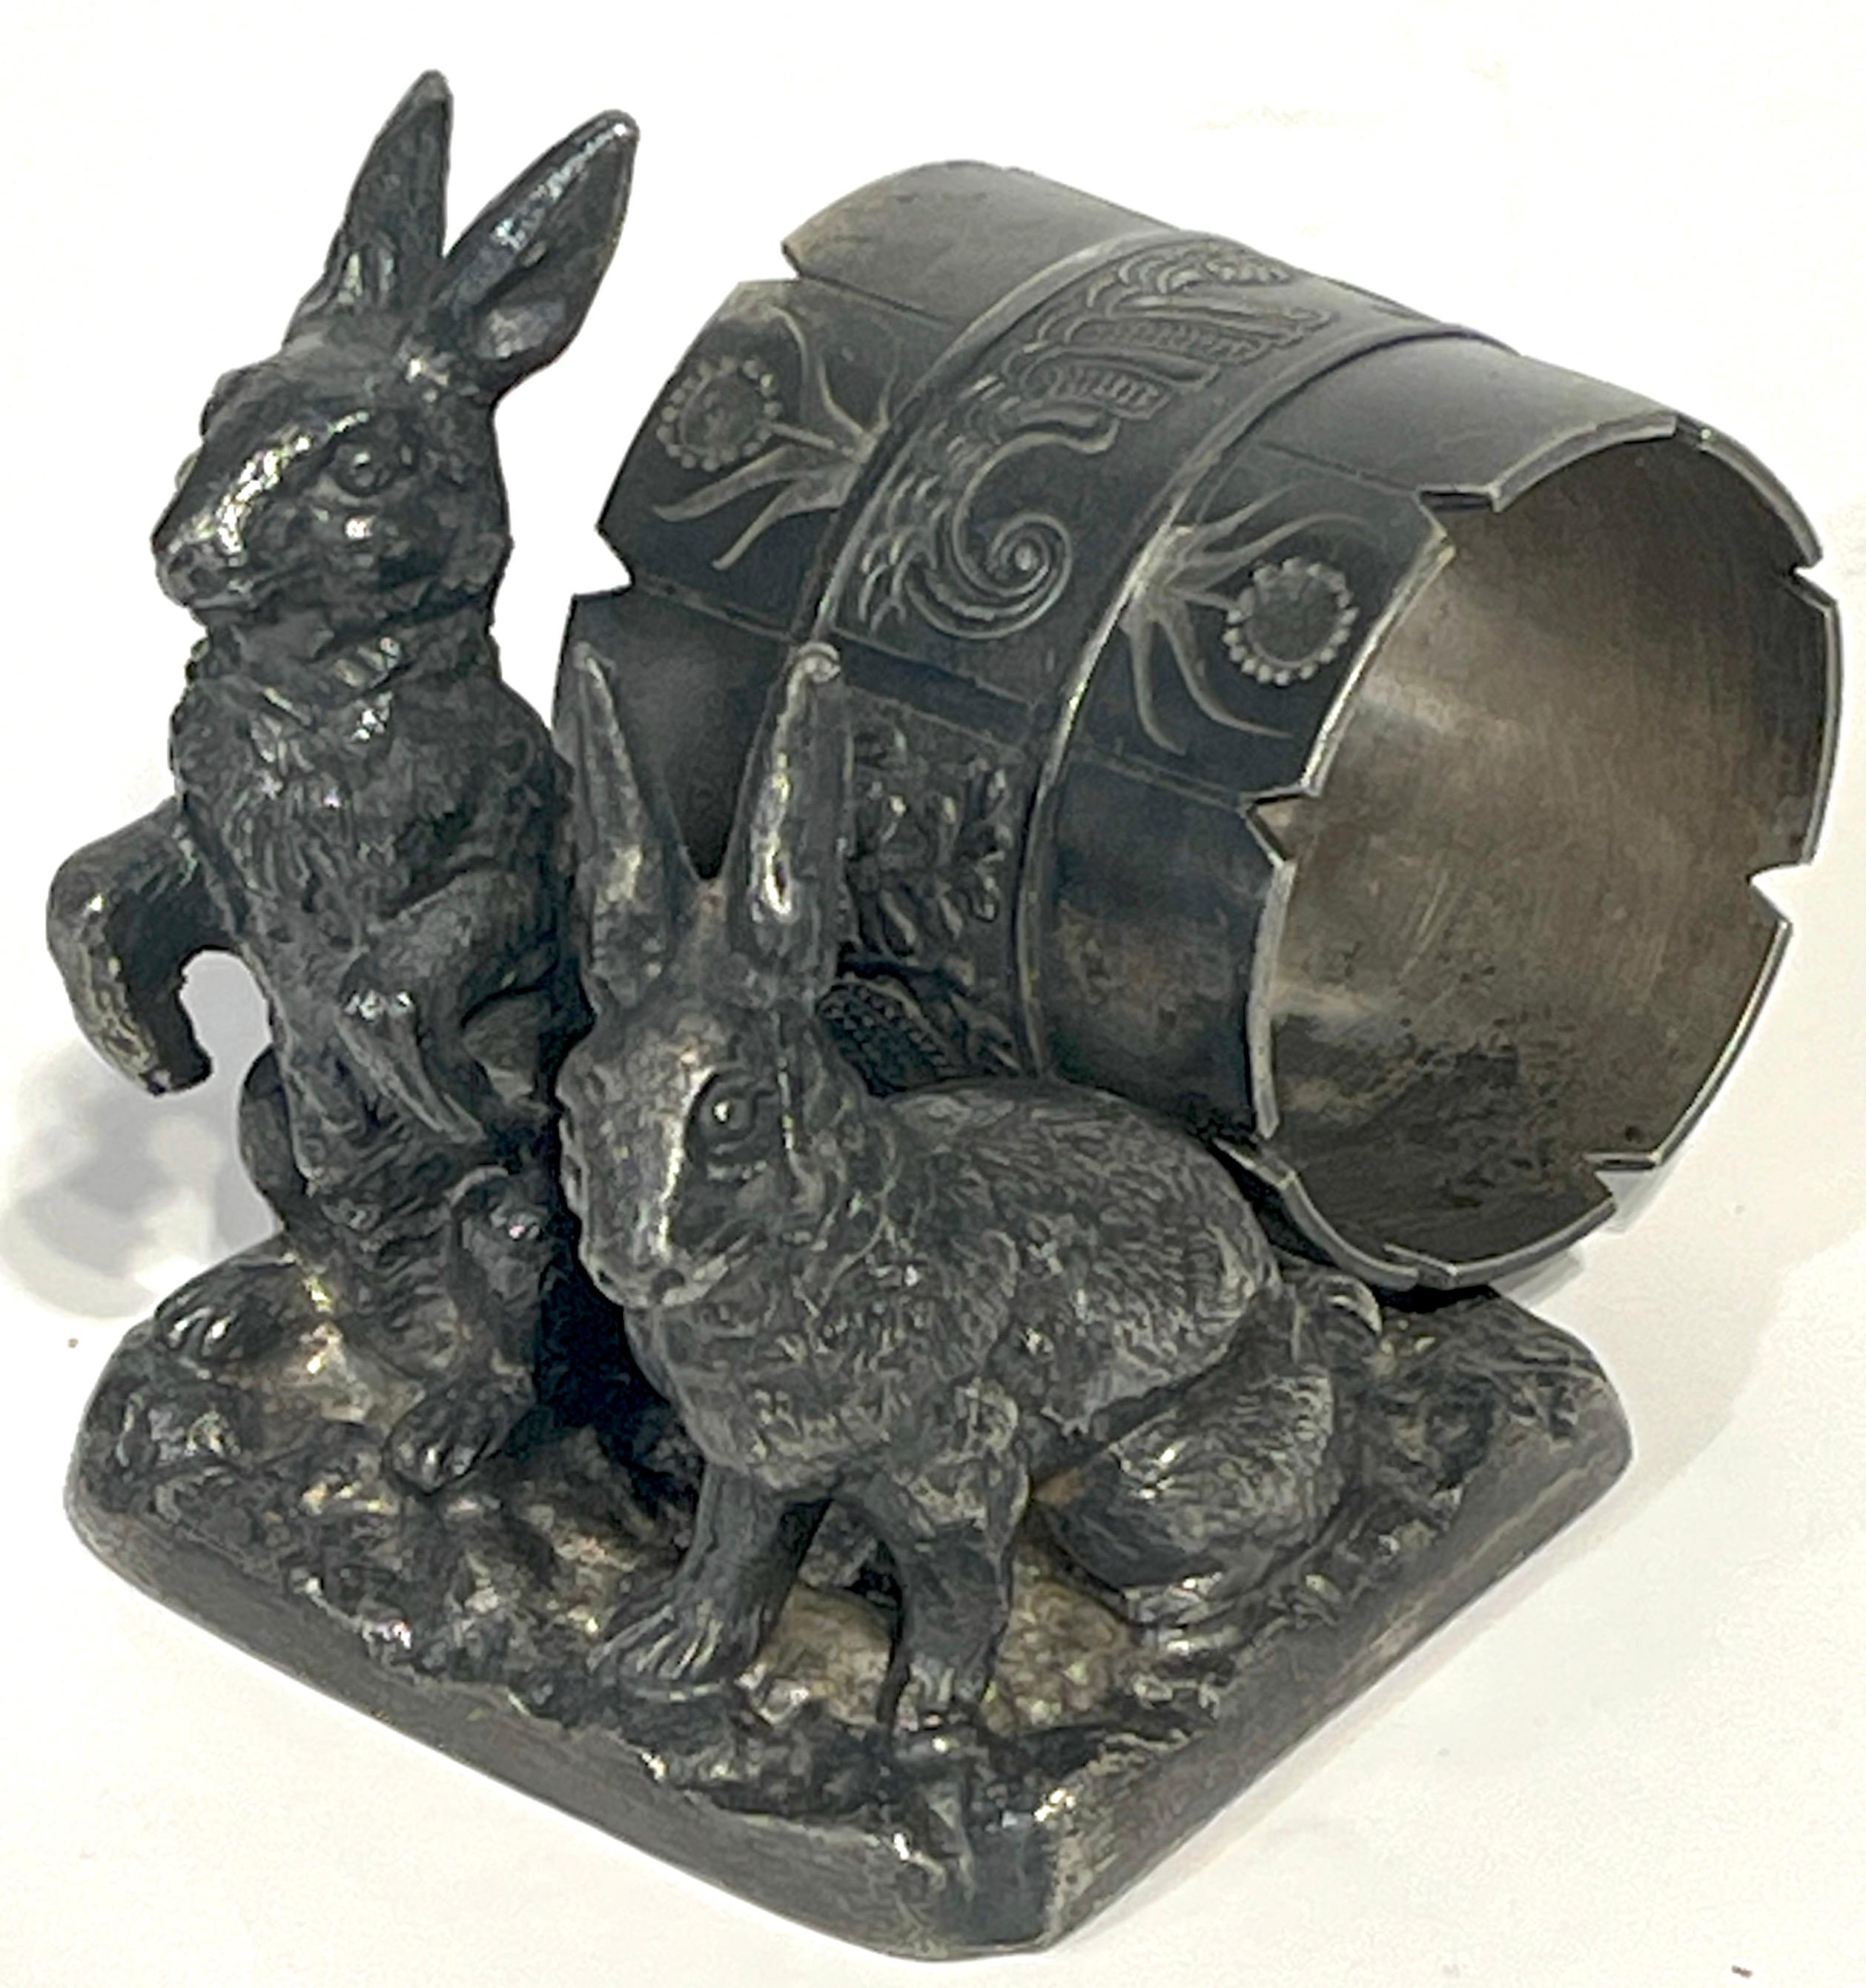 Pairpoint Silverplated Figural Napkin Ring 'Double Rabbits' 
Pairpoint MFG Co. New Bedford, MA, circa 1890

For collectors of exquisite tableware, this circa 1890 Pairpoint silverplated figural napkin ring is a rare find. Measuring a substantial 3.5